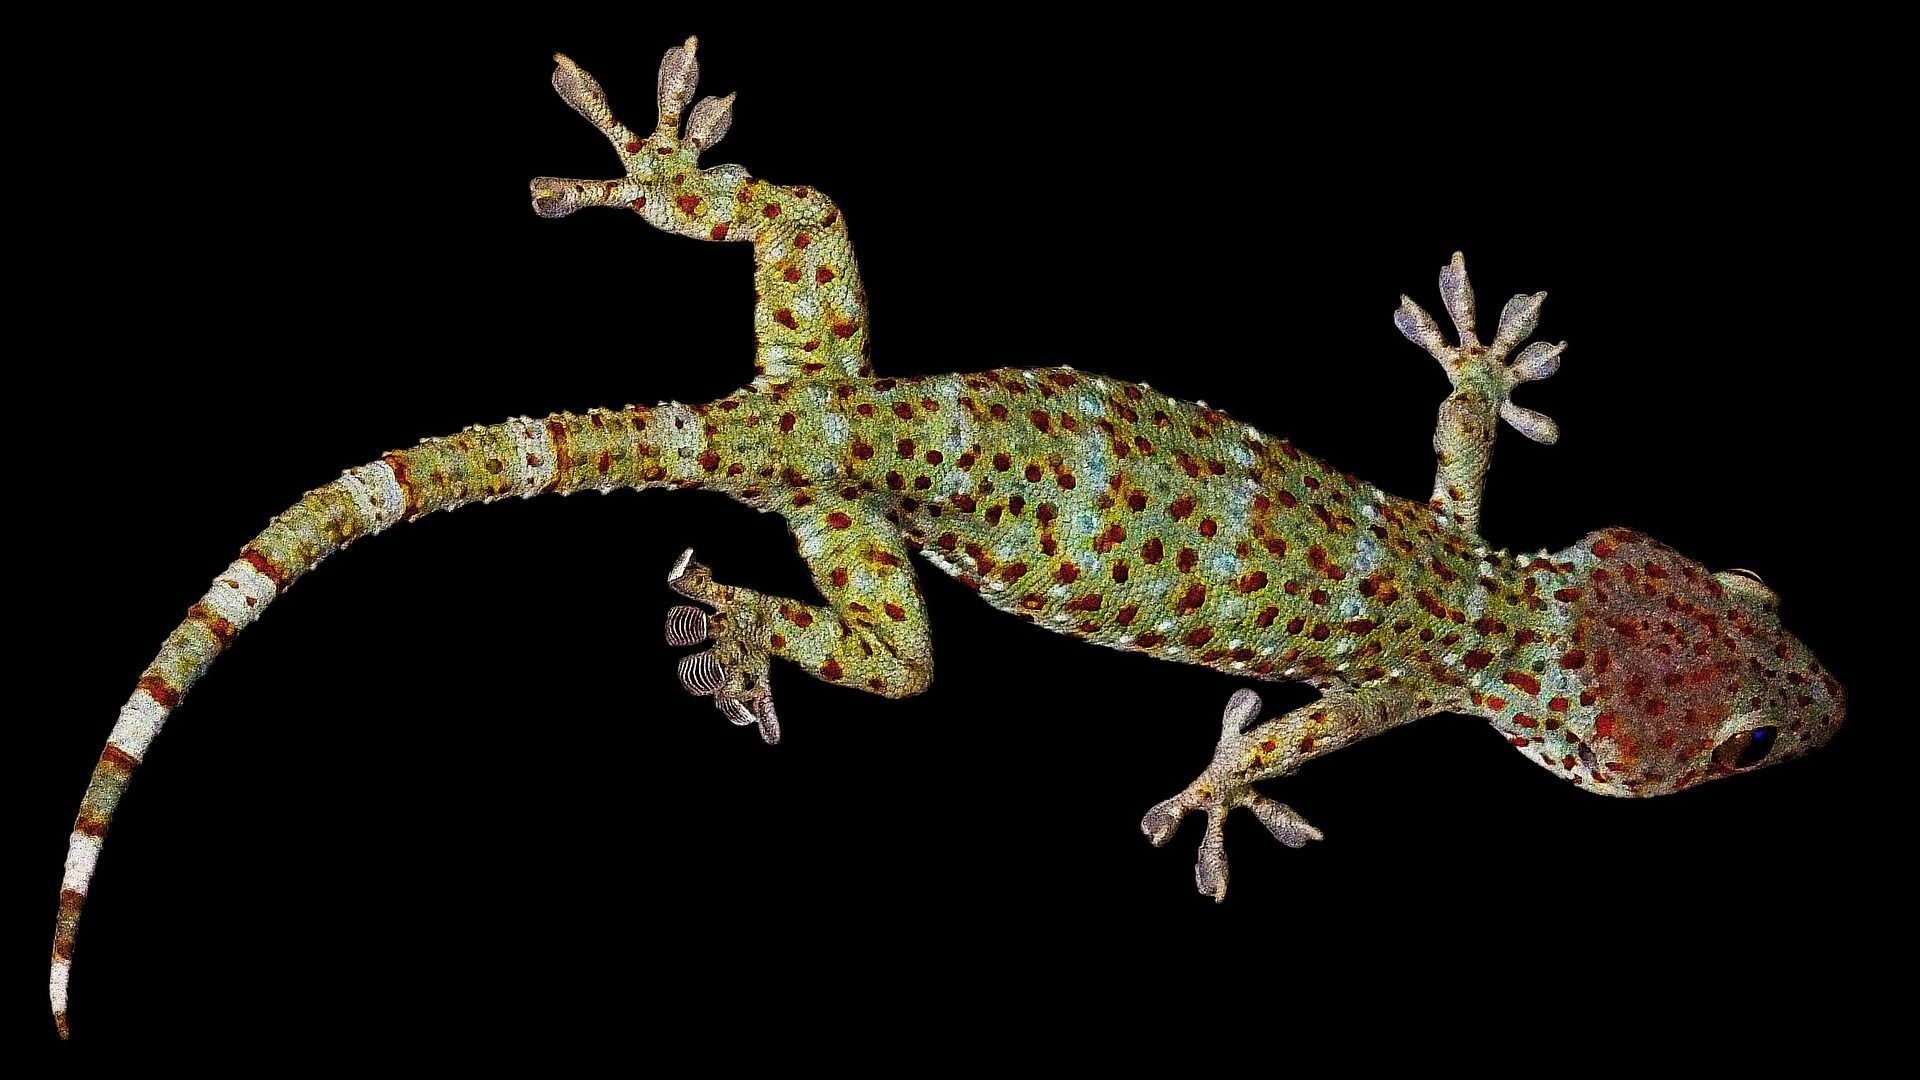 A new species of gecko has been found in Australia